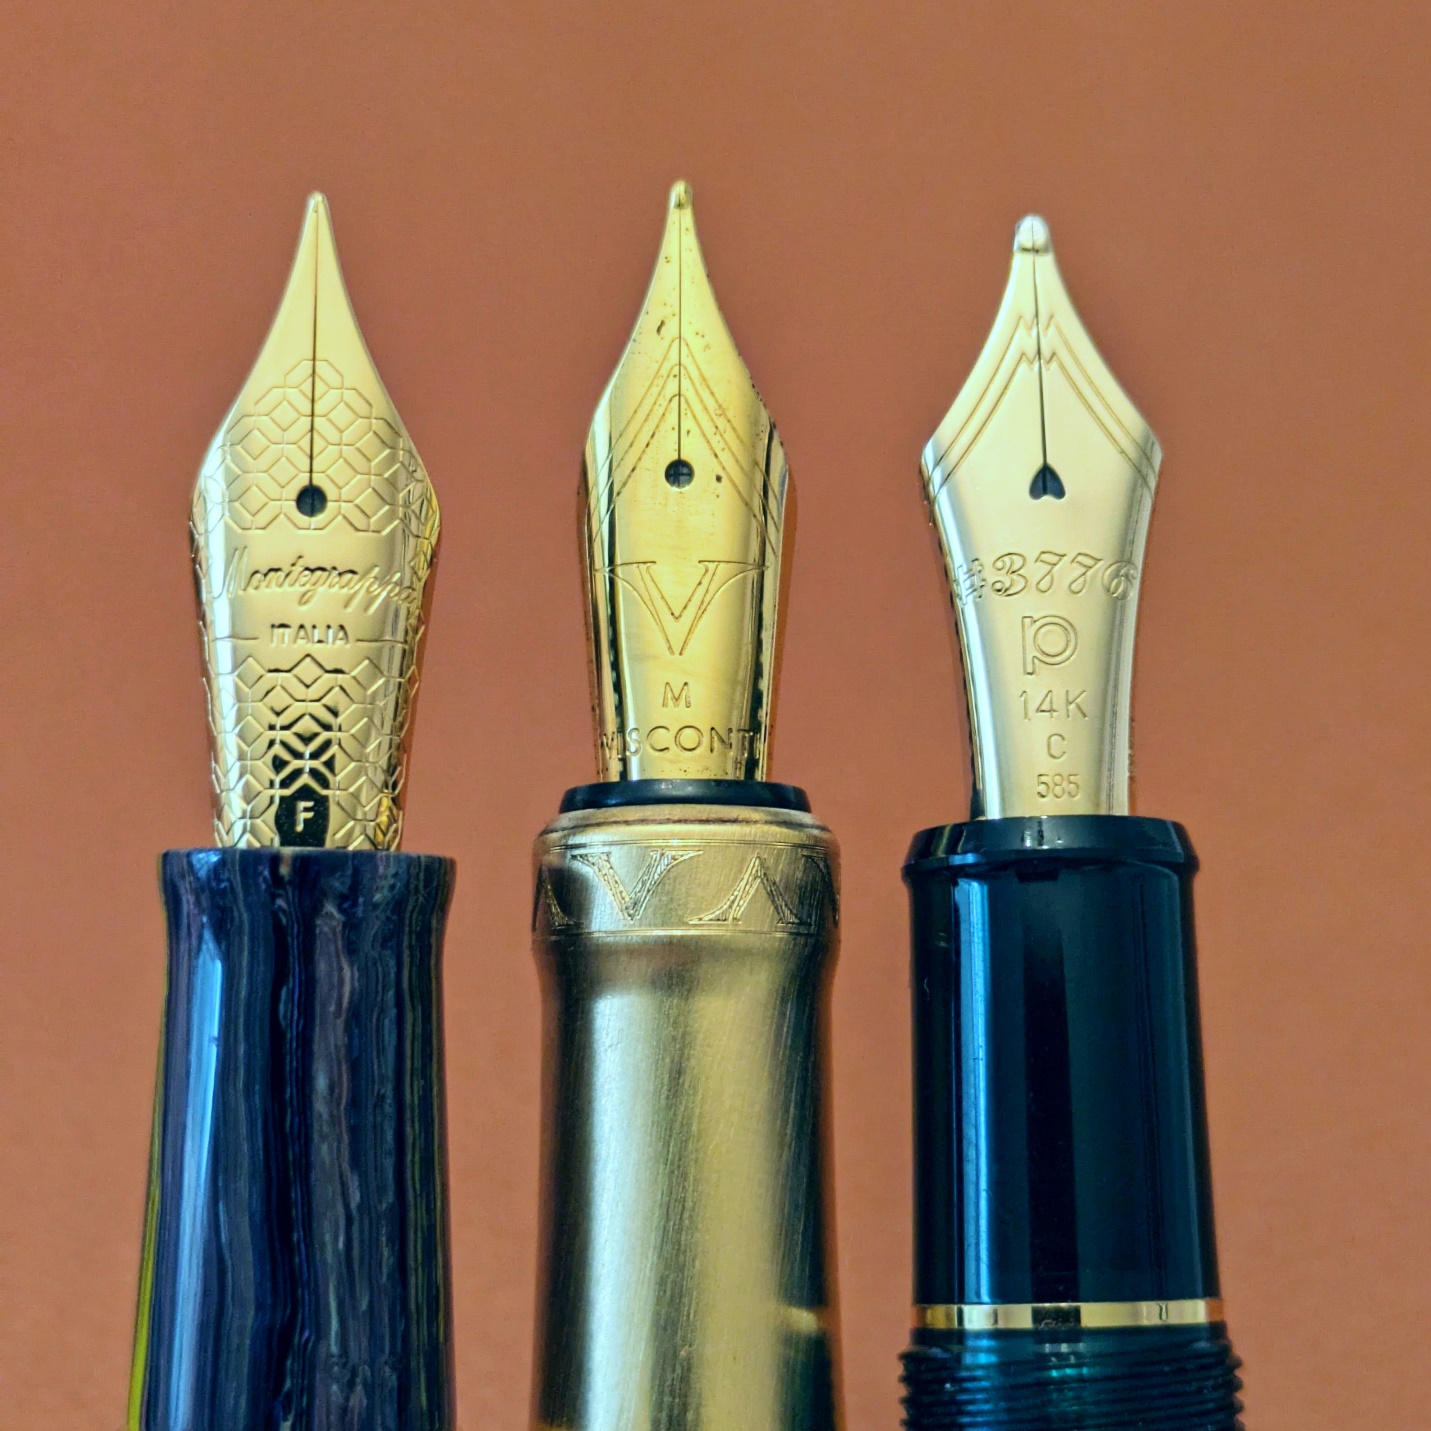 Left to right: Montegrappa Venetia, Visconti Opera Gold, Platinum 3776. The V logo honestly looks more suited to the wide shoulders of the 3776 nib.